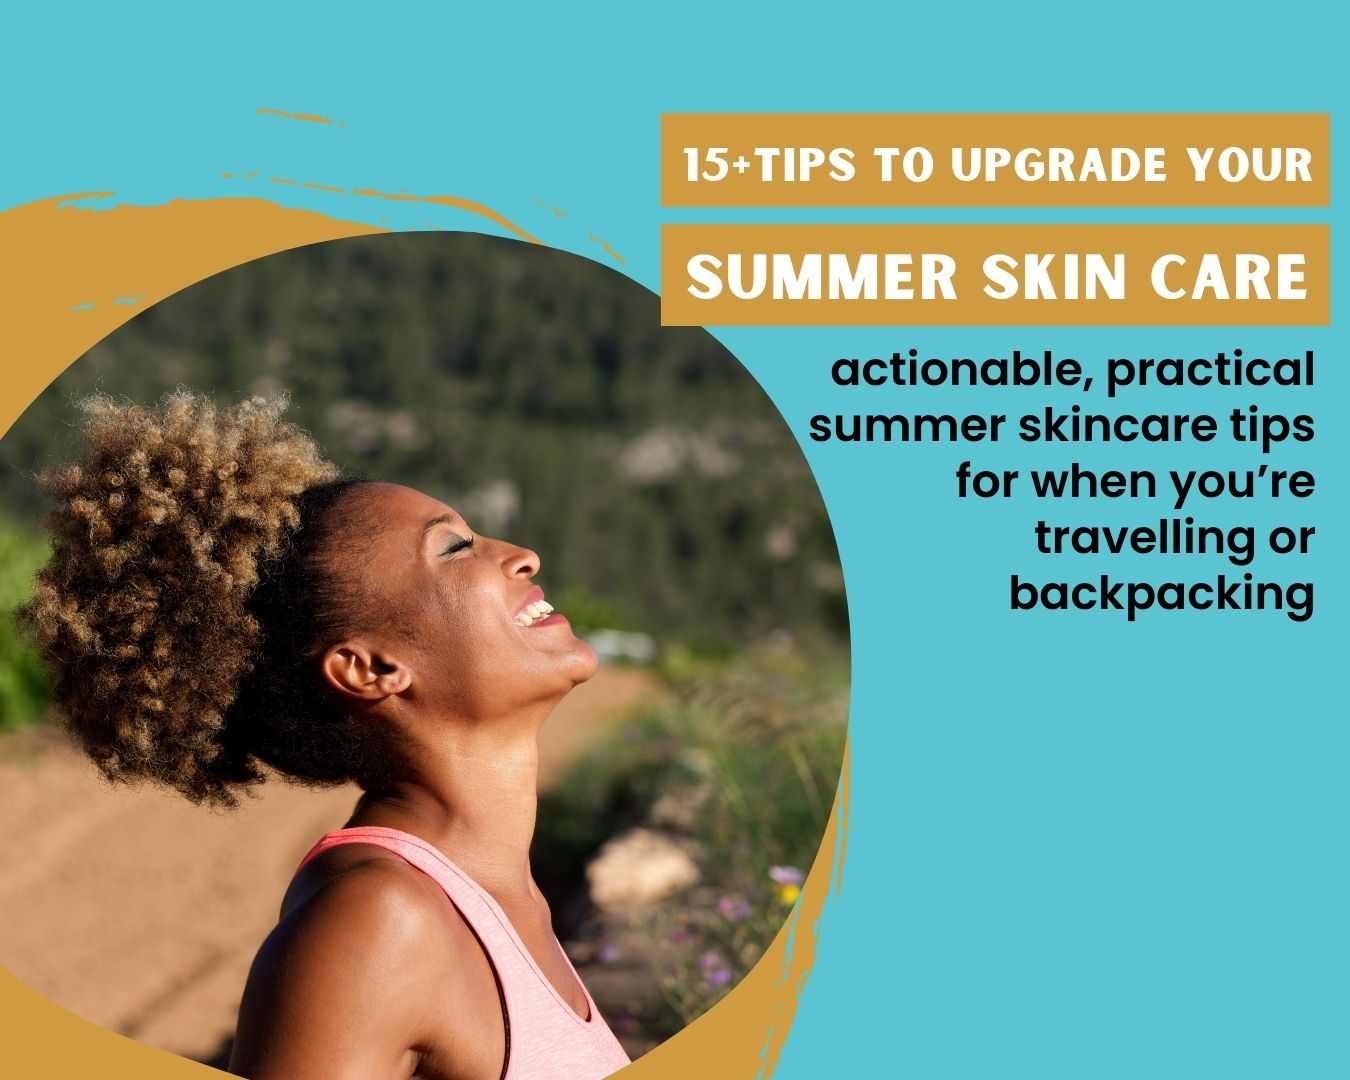 15+TIPS TO UPGRADE YOUR summer skin CARE